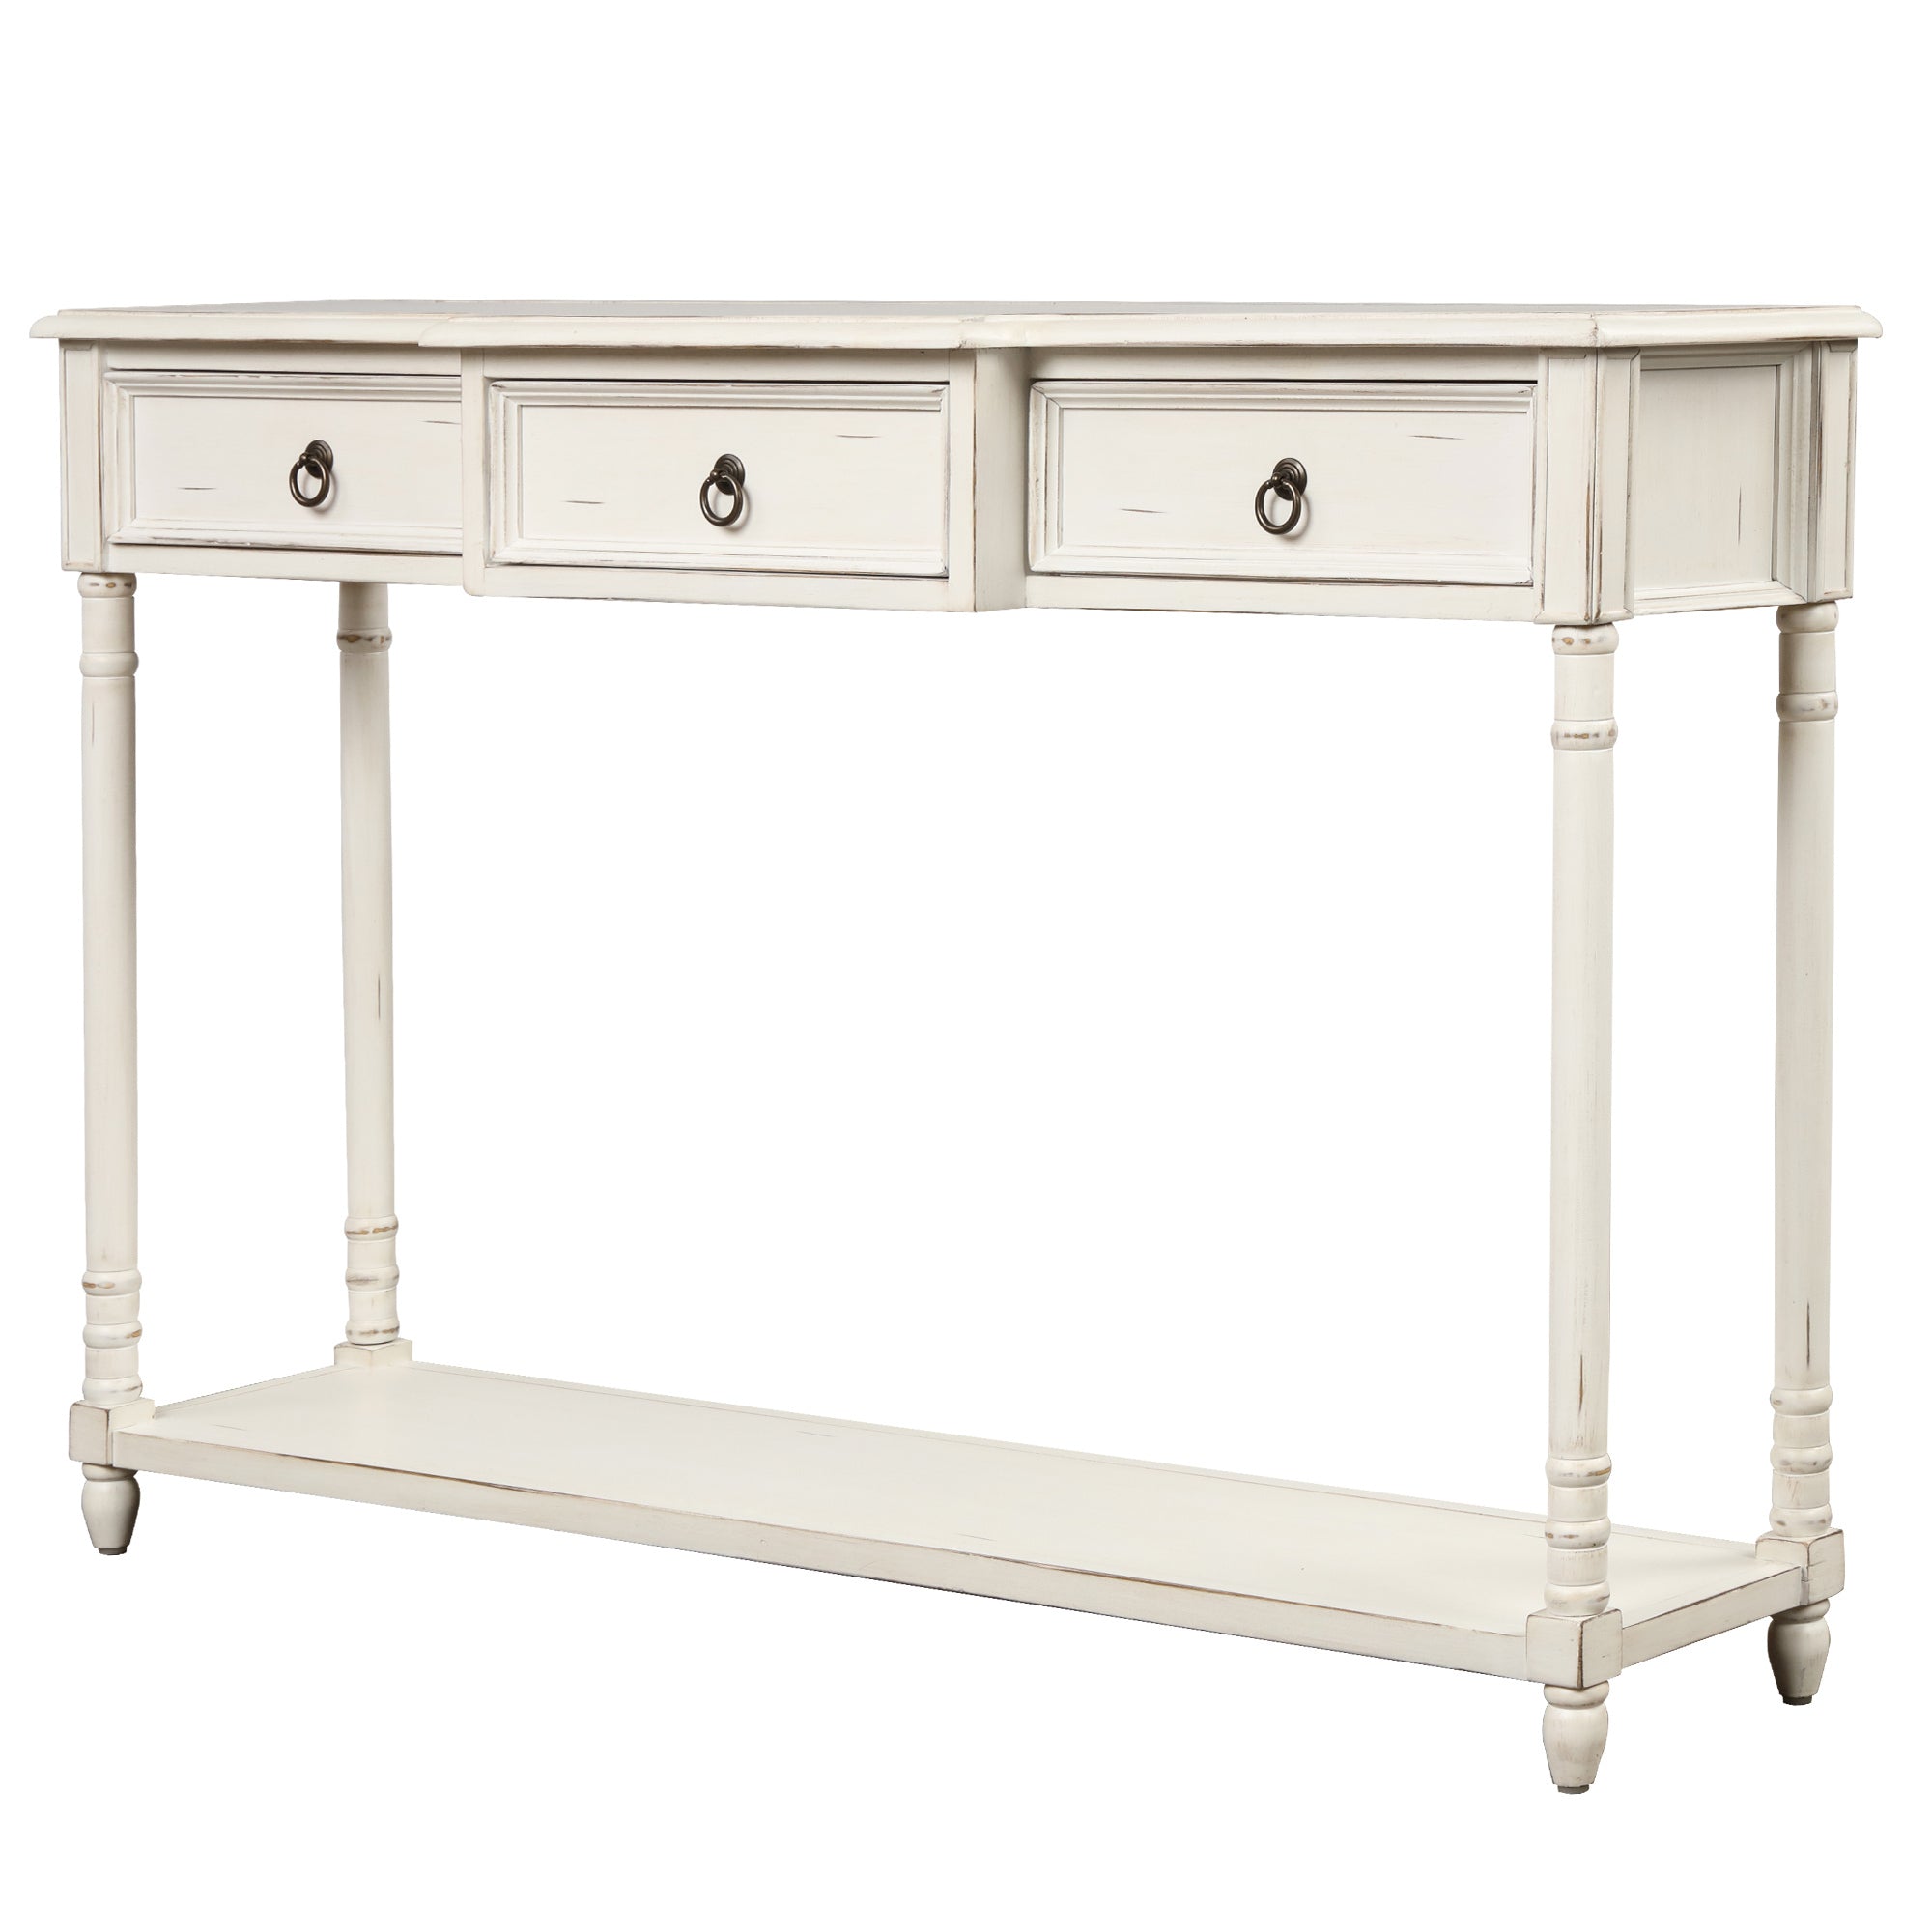 Console table with a long shelf